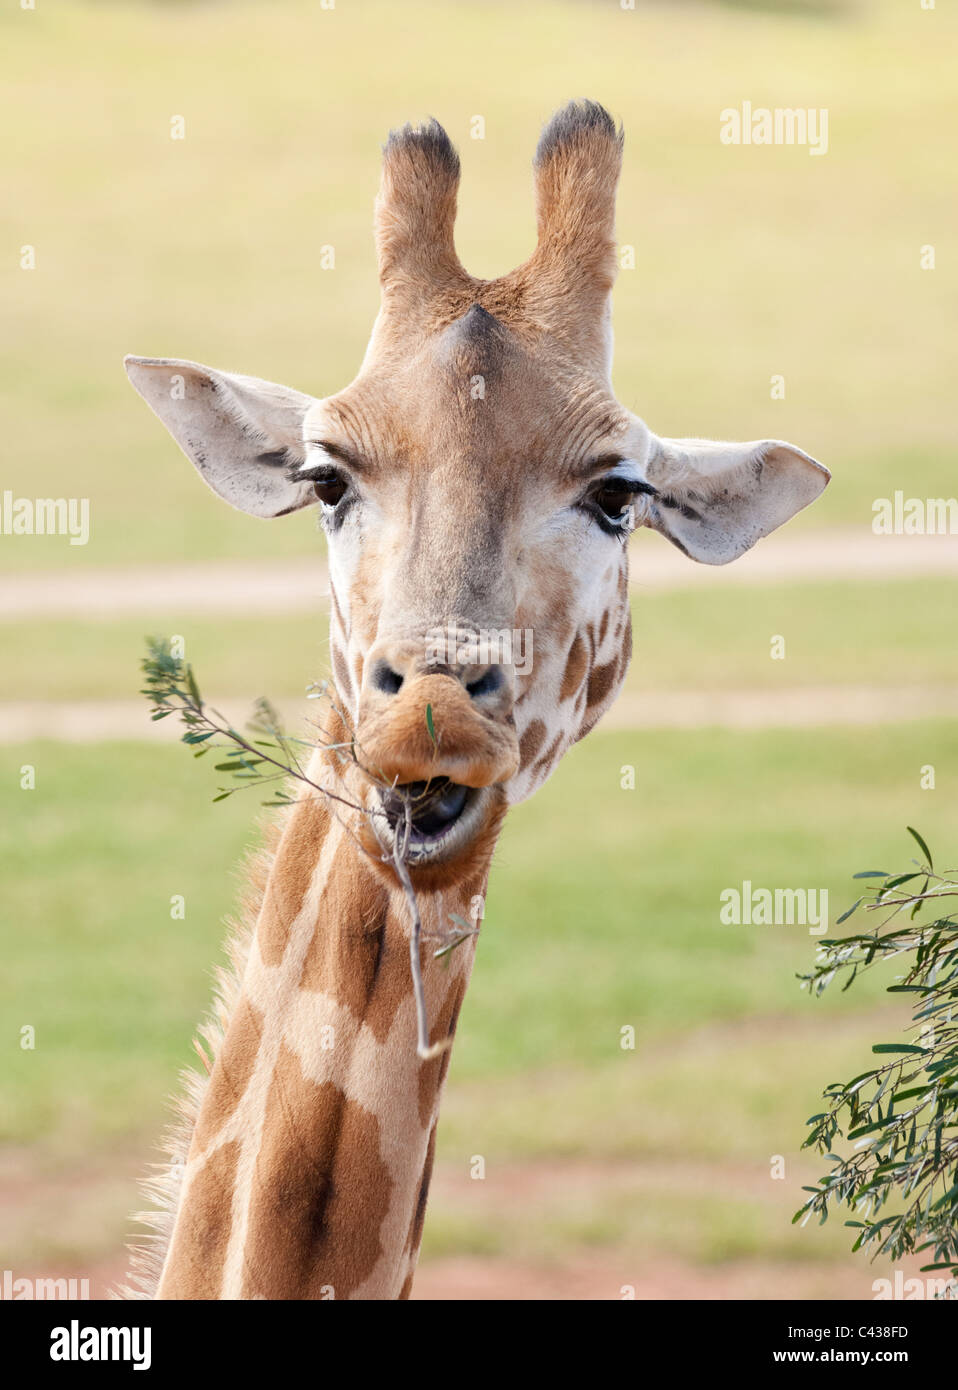 african giraffe in natural environment up close  Stock Photo